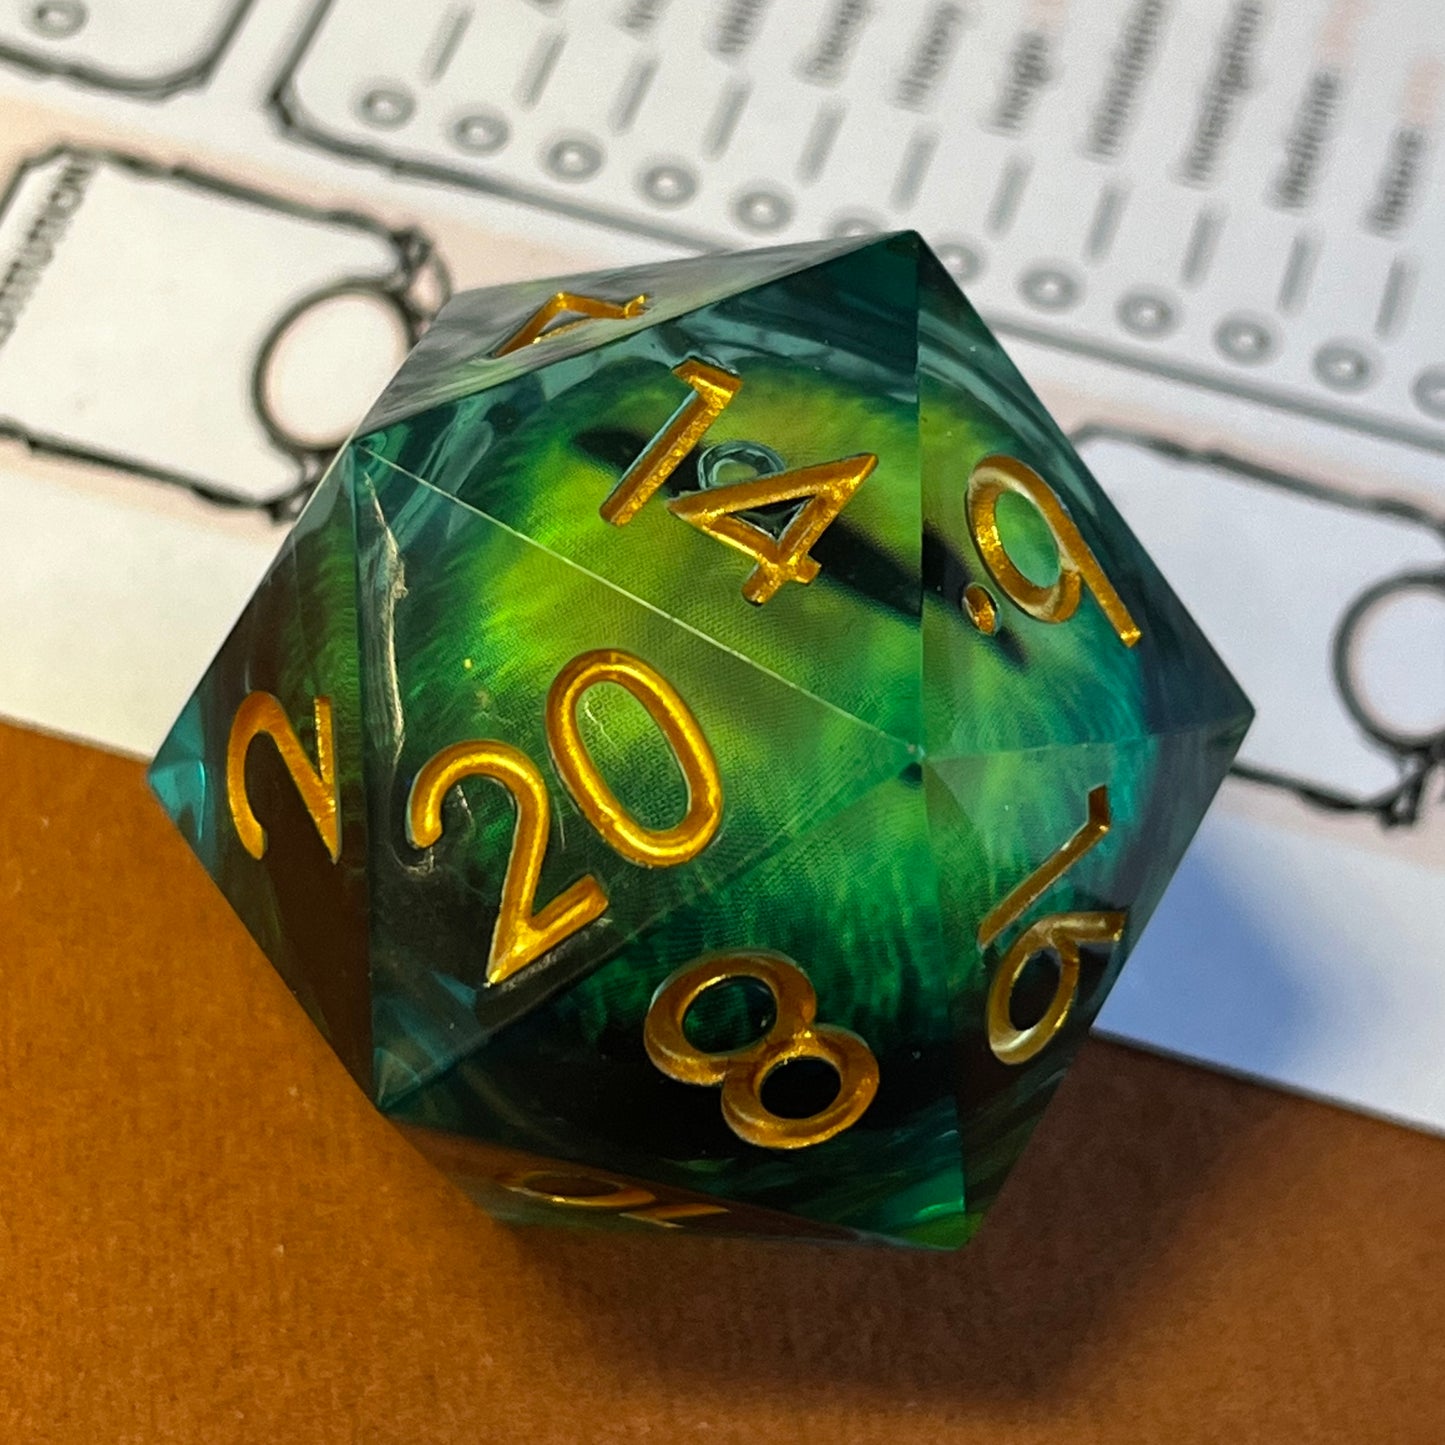 Green eyes, dragon eye moving liquid core, dnd dice, TTRPG, role playing, role playing games